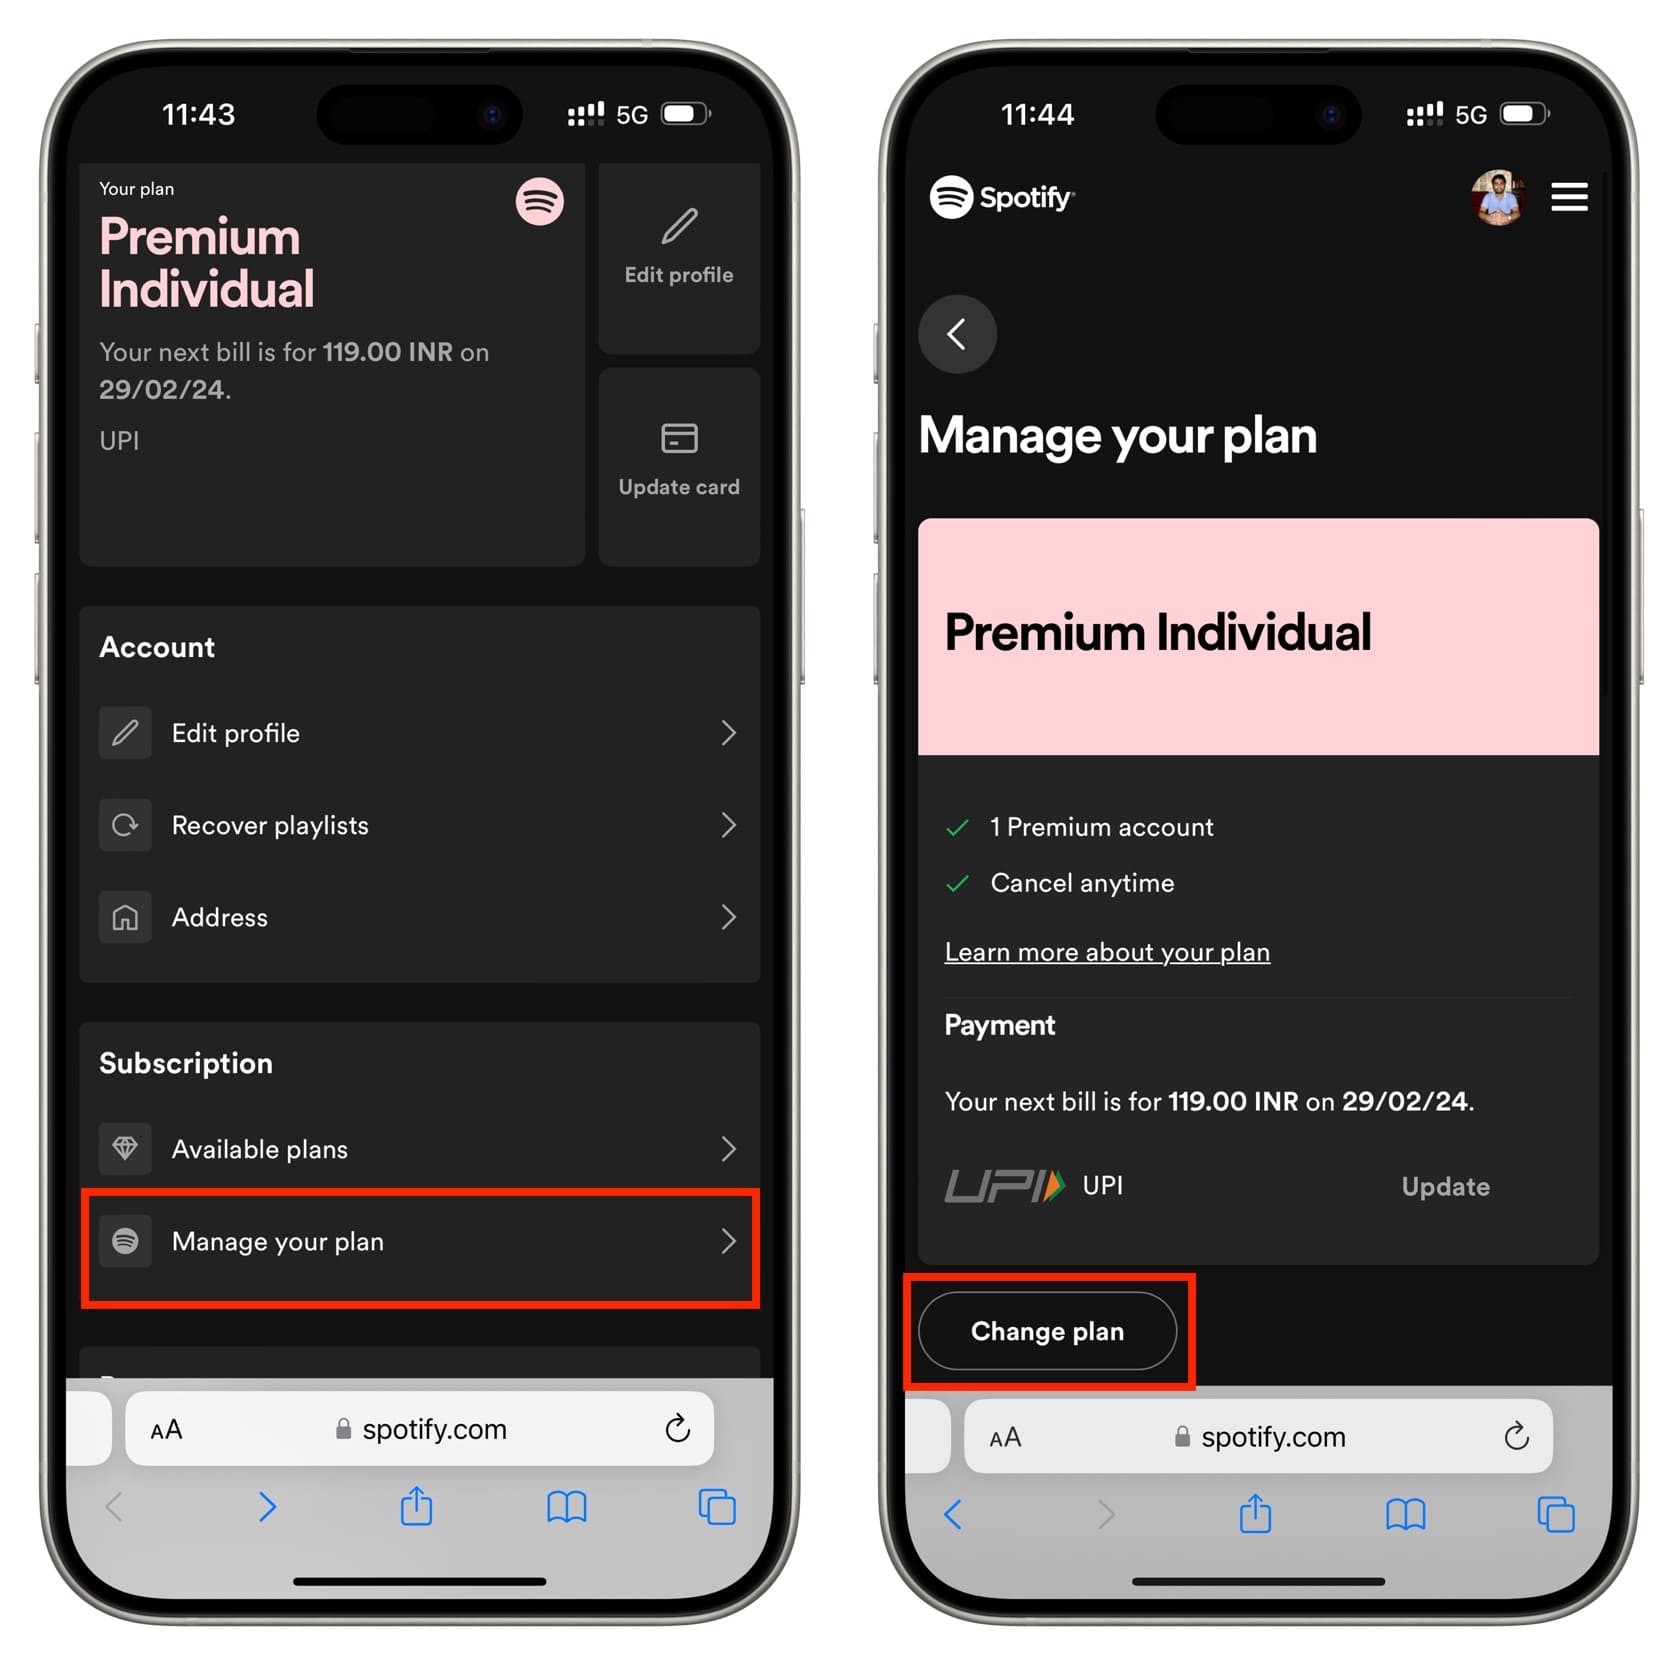 Manage your plan and choose Change plan on Spotify on iPhone